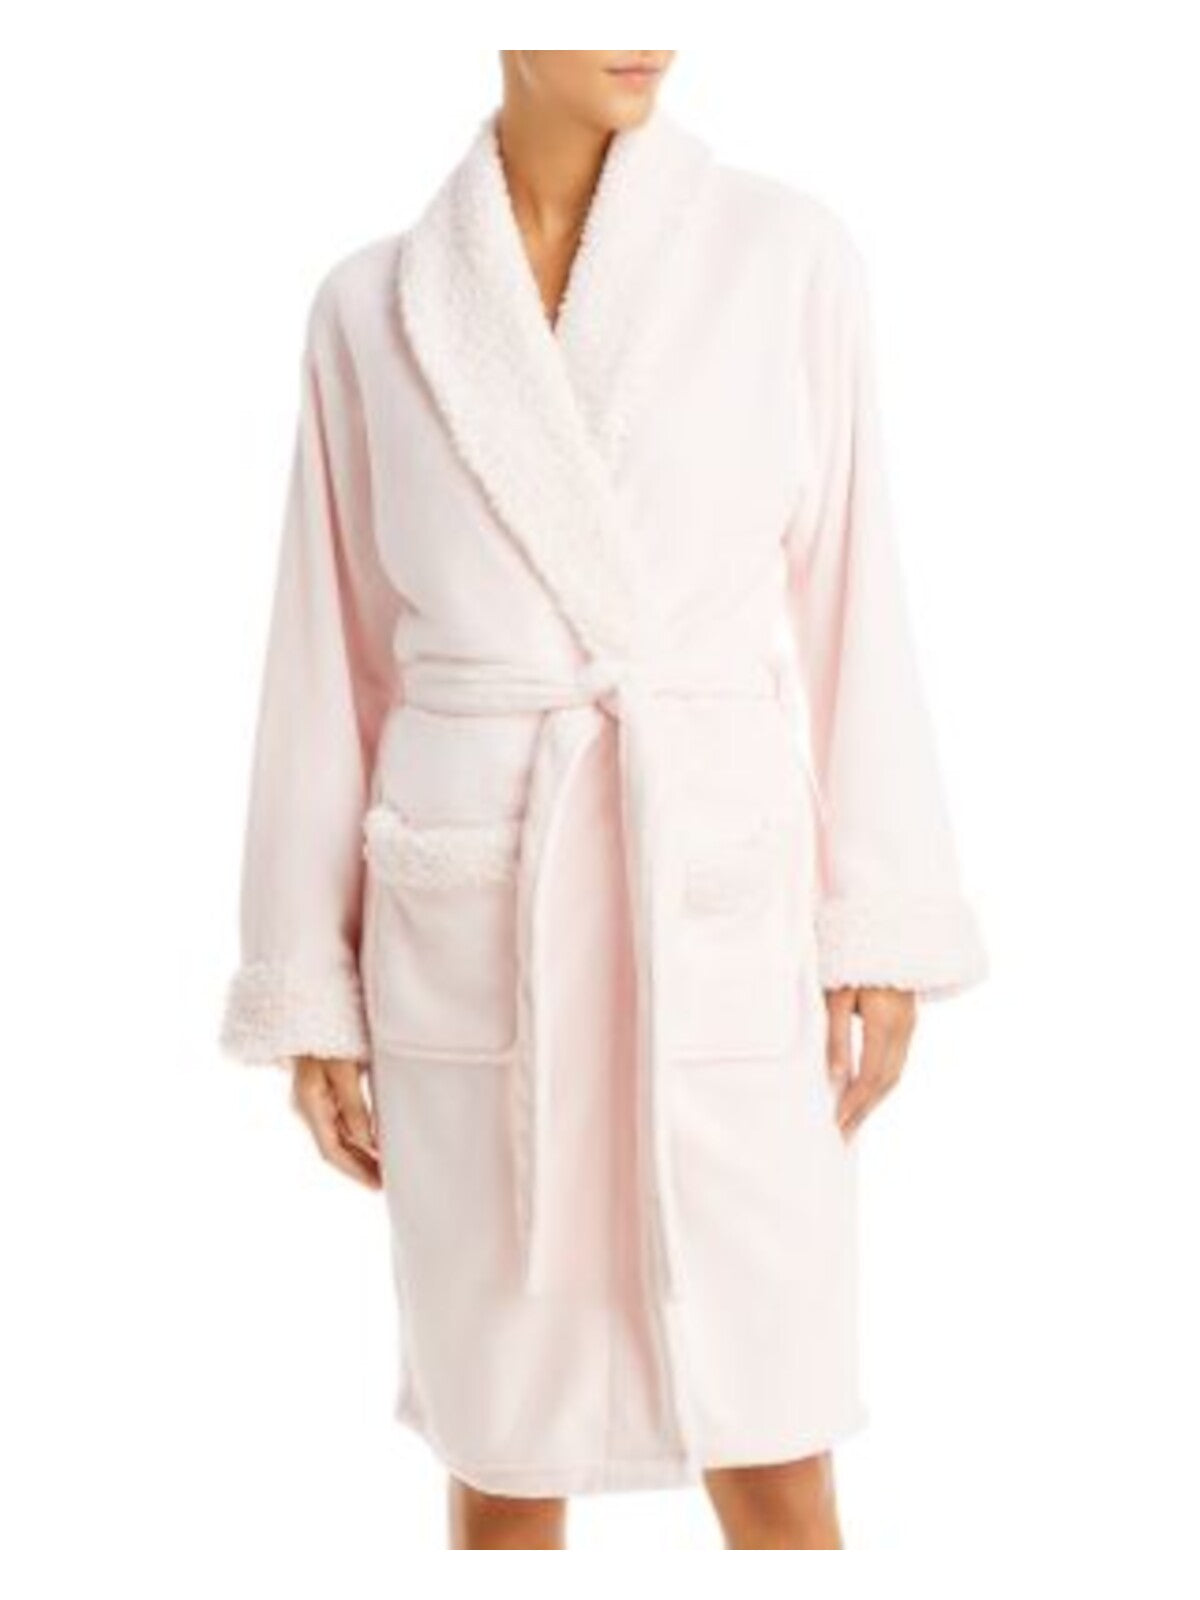 HUDSON PARK COLLECTION Intimates Pink Pocketed Robe L\XL